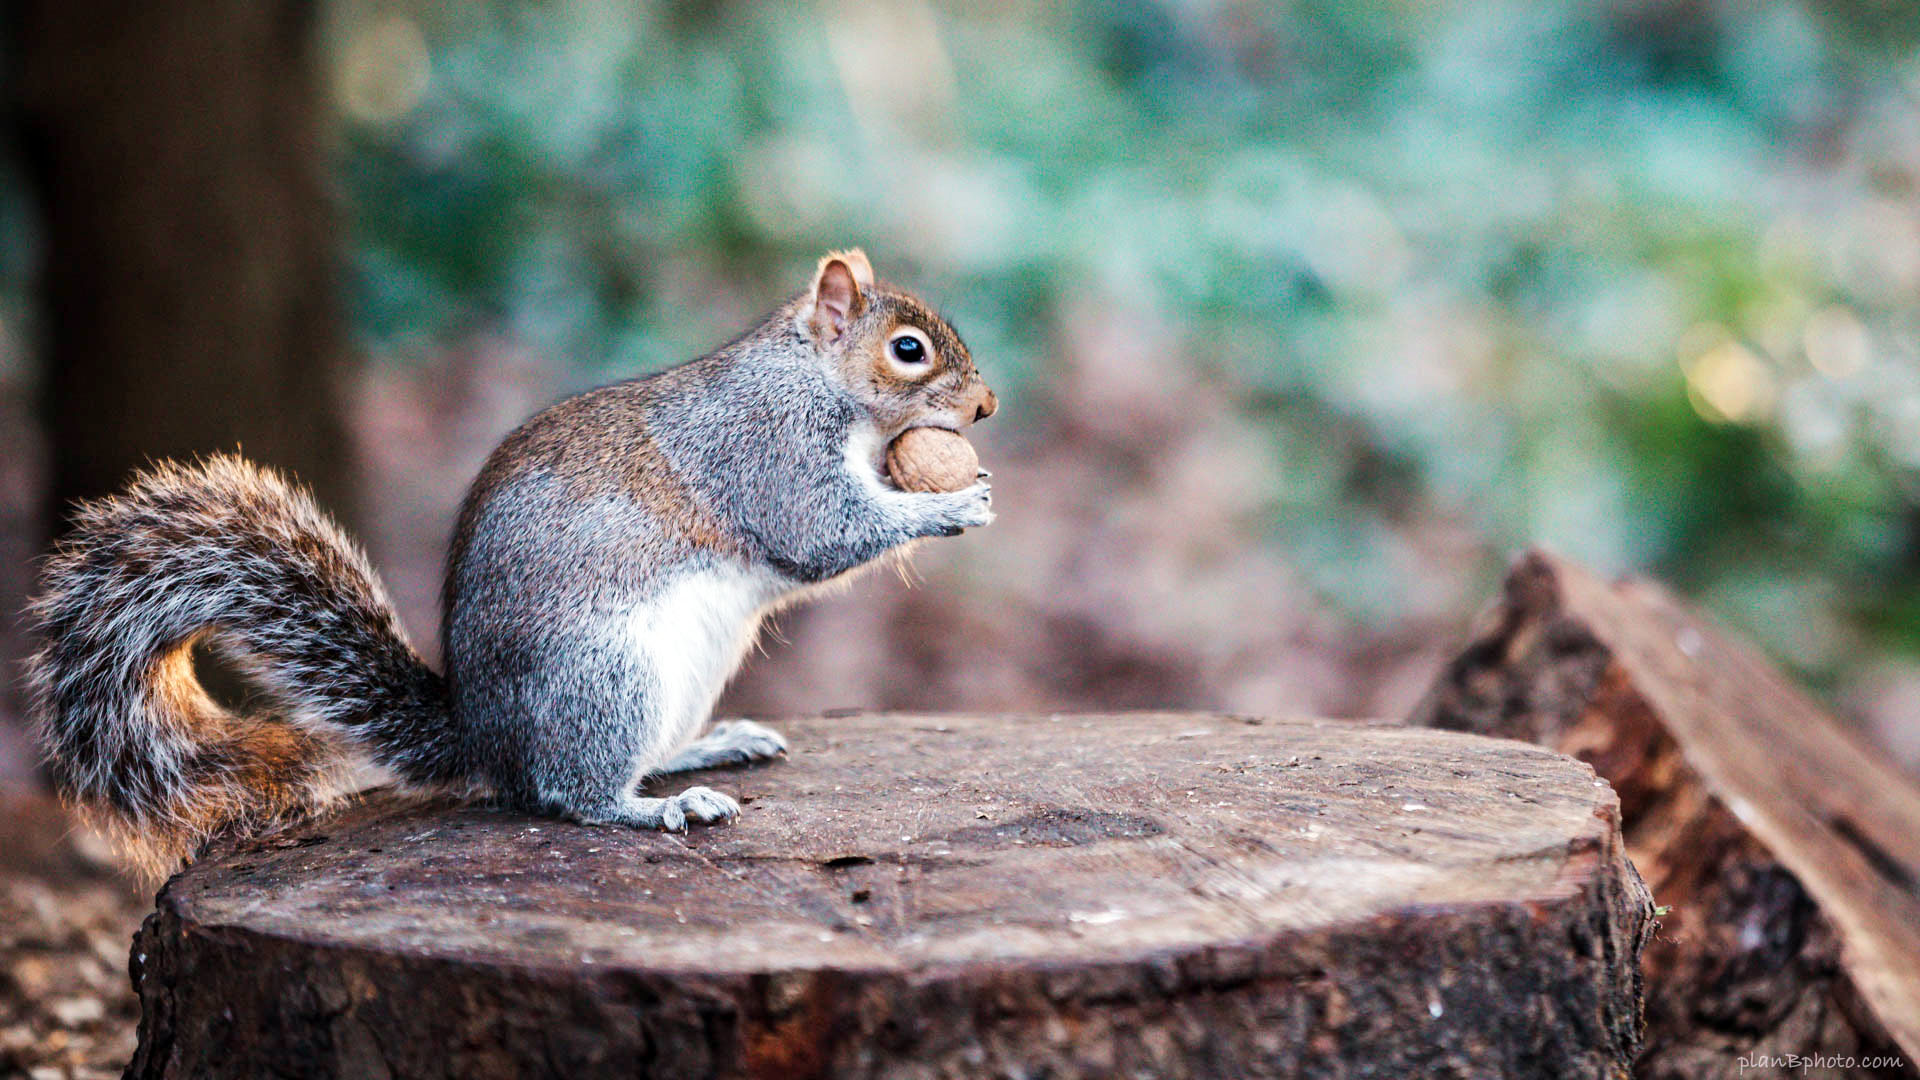 Funny grey squirrel trying to eat the whole walnut : free image